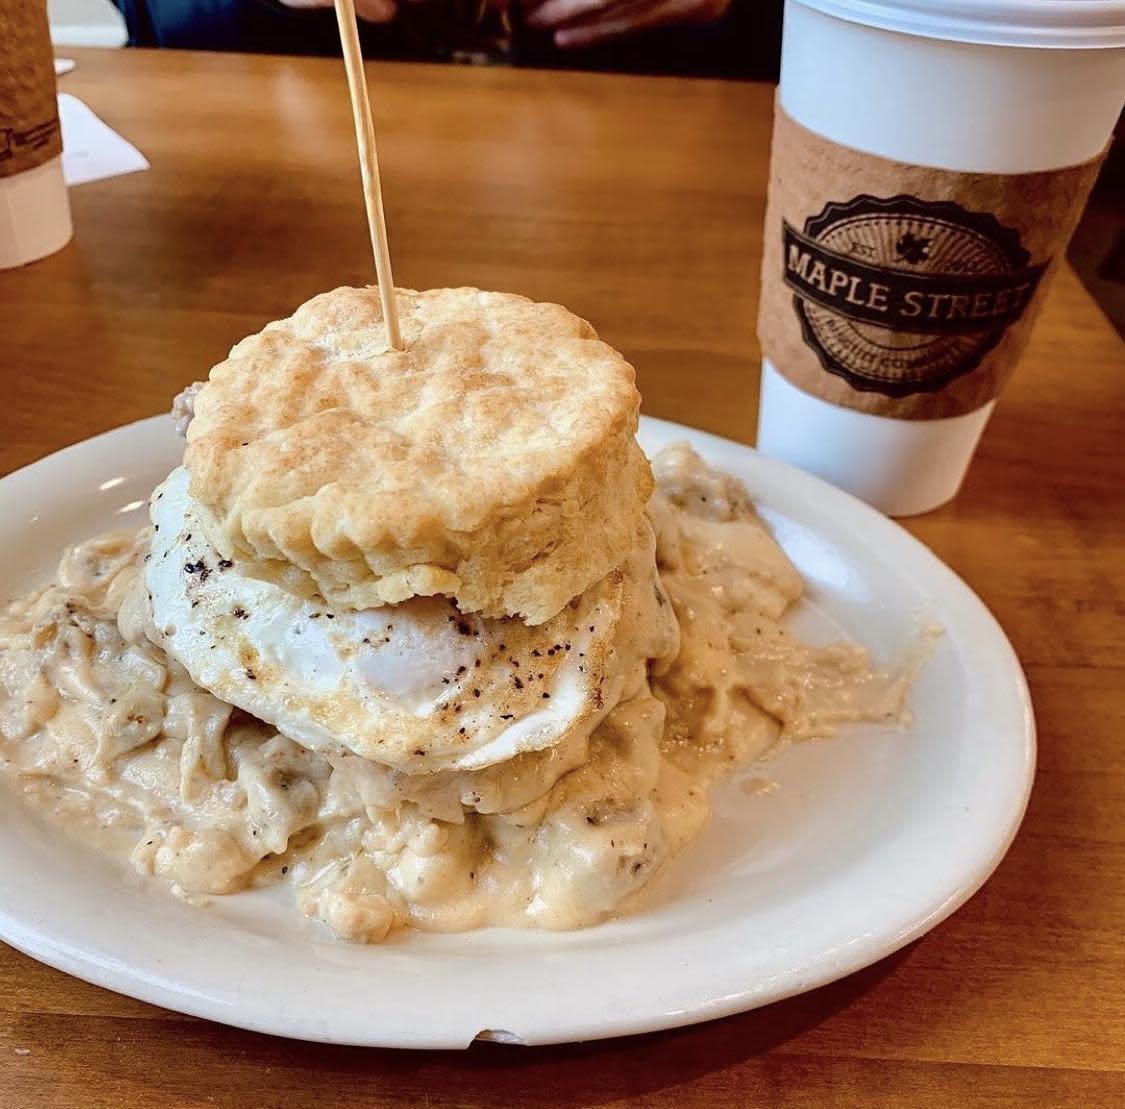 A &ldquo;Five and Dime&rdquo; biscuit from Maple Street Biscuit Company, topped with fried chicken, a fried egg, pecanwood smoked bacon, cheddar cheese and house-made gravy.